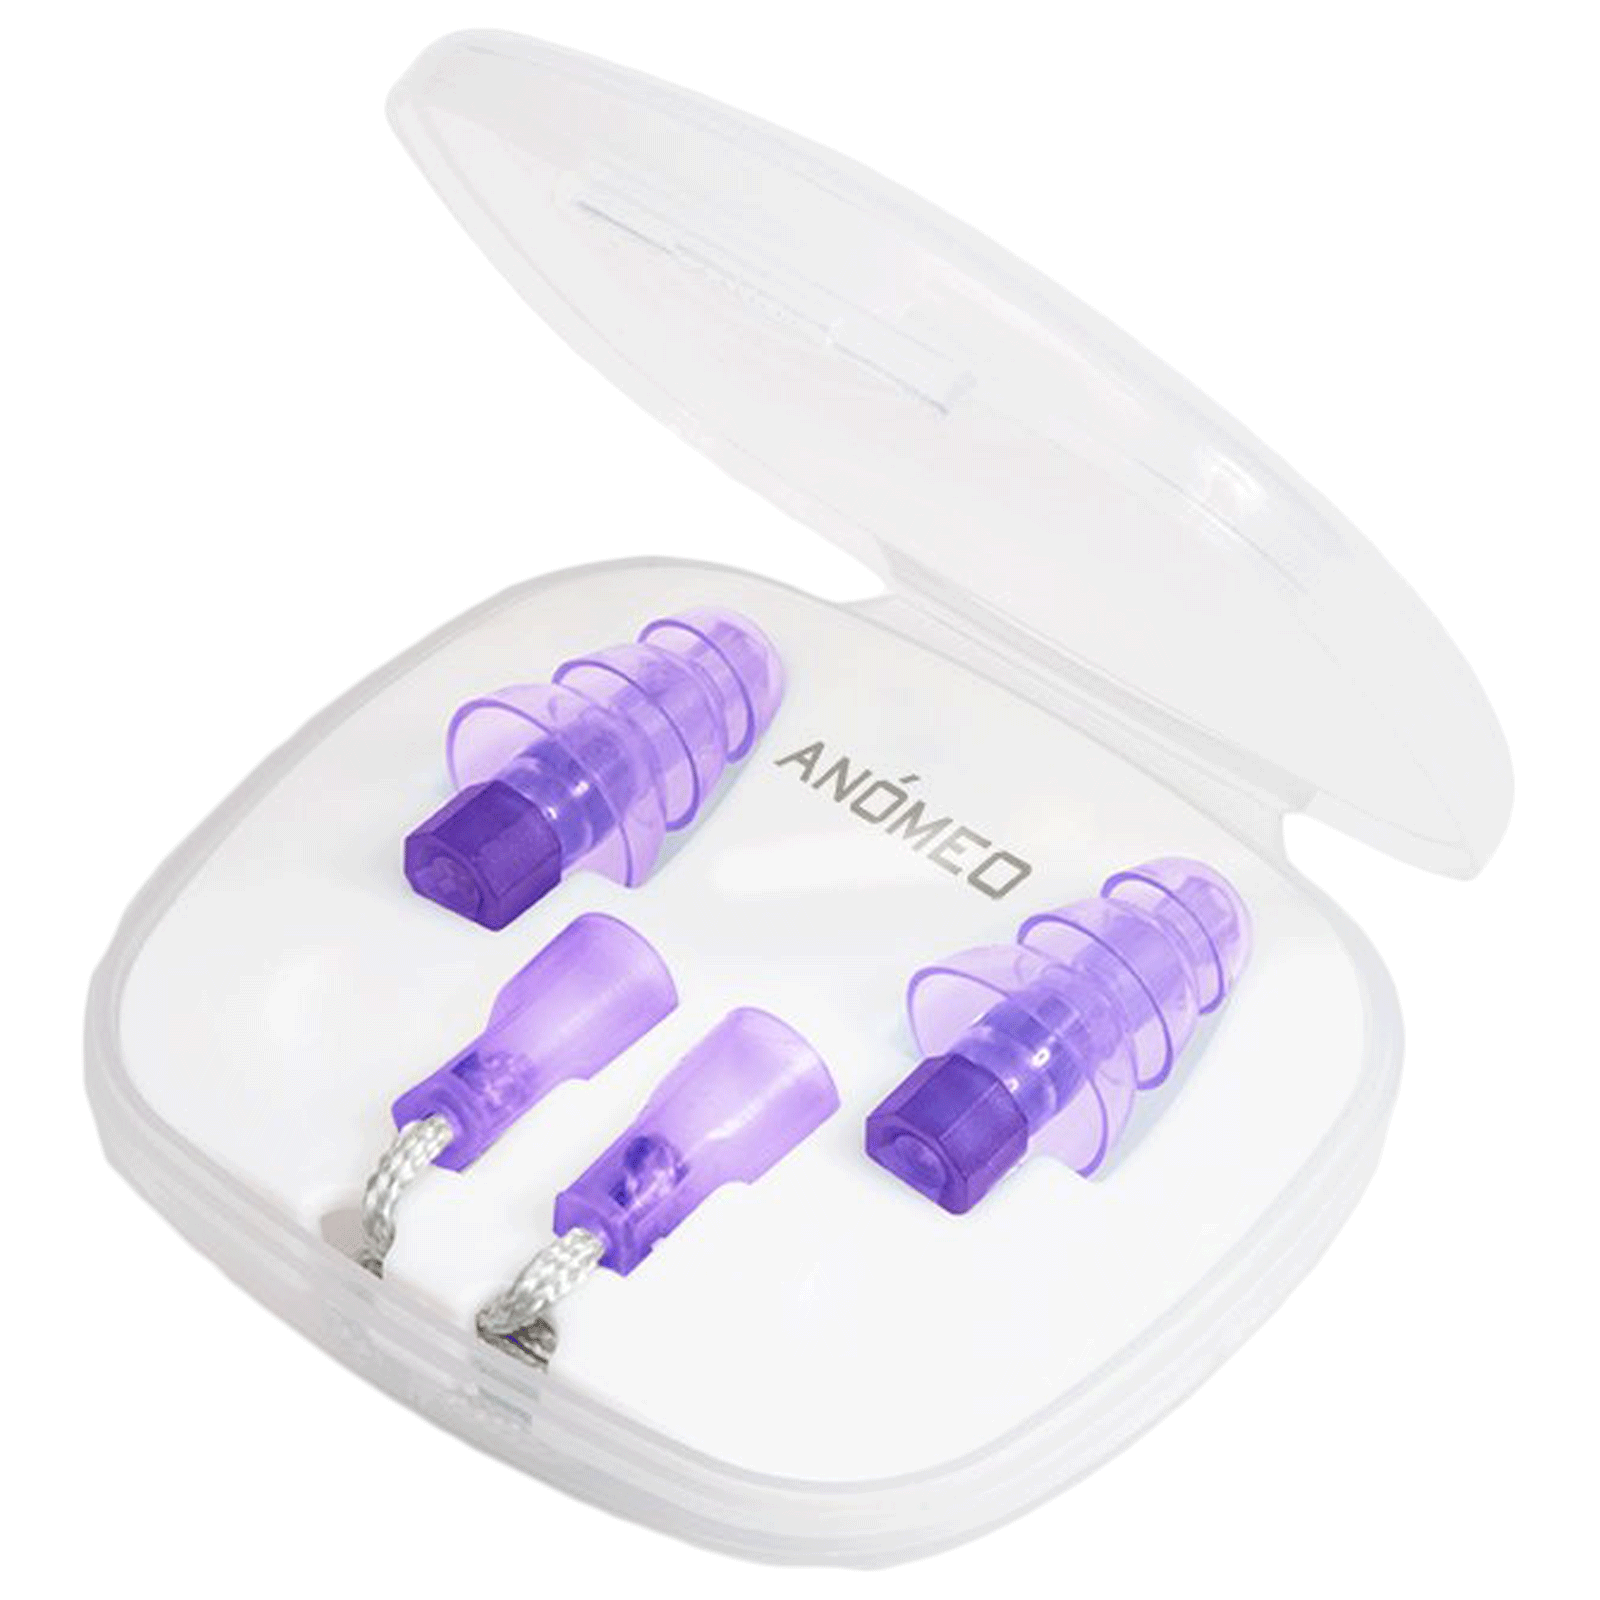 Anomeo Focus and Relax Silicone and Polypropylene Earplugs (Noise Cancellation, 2430, Purple)_1